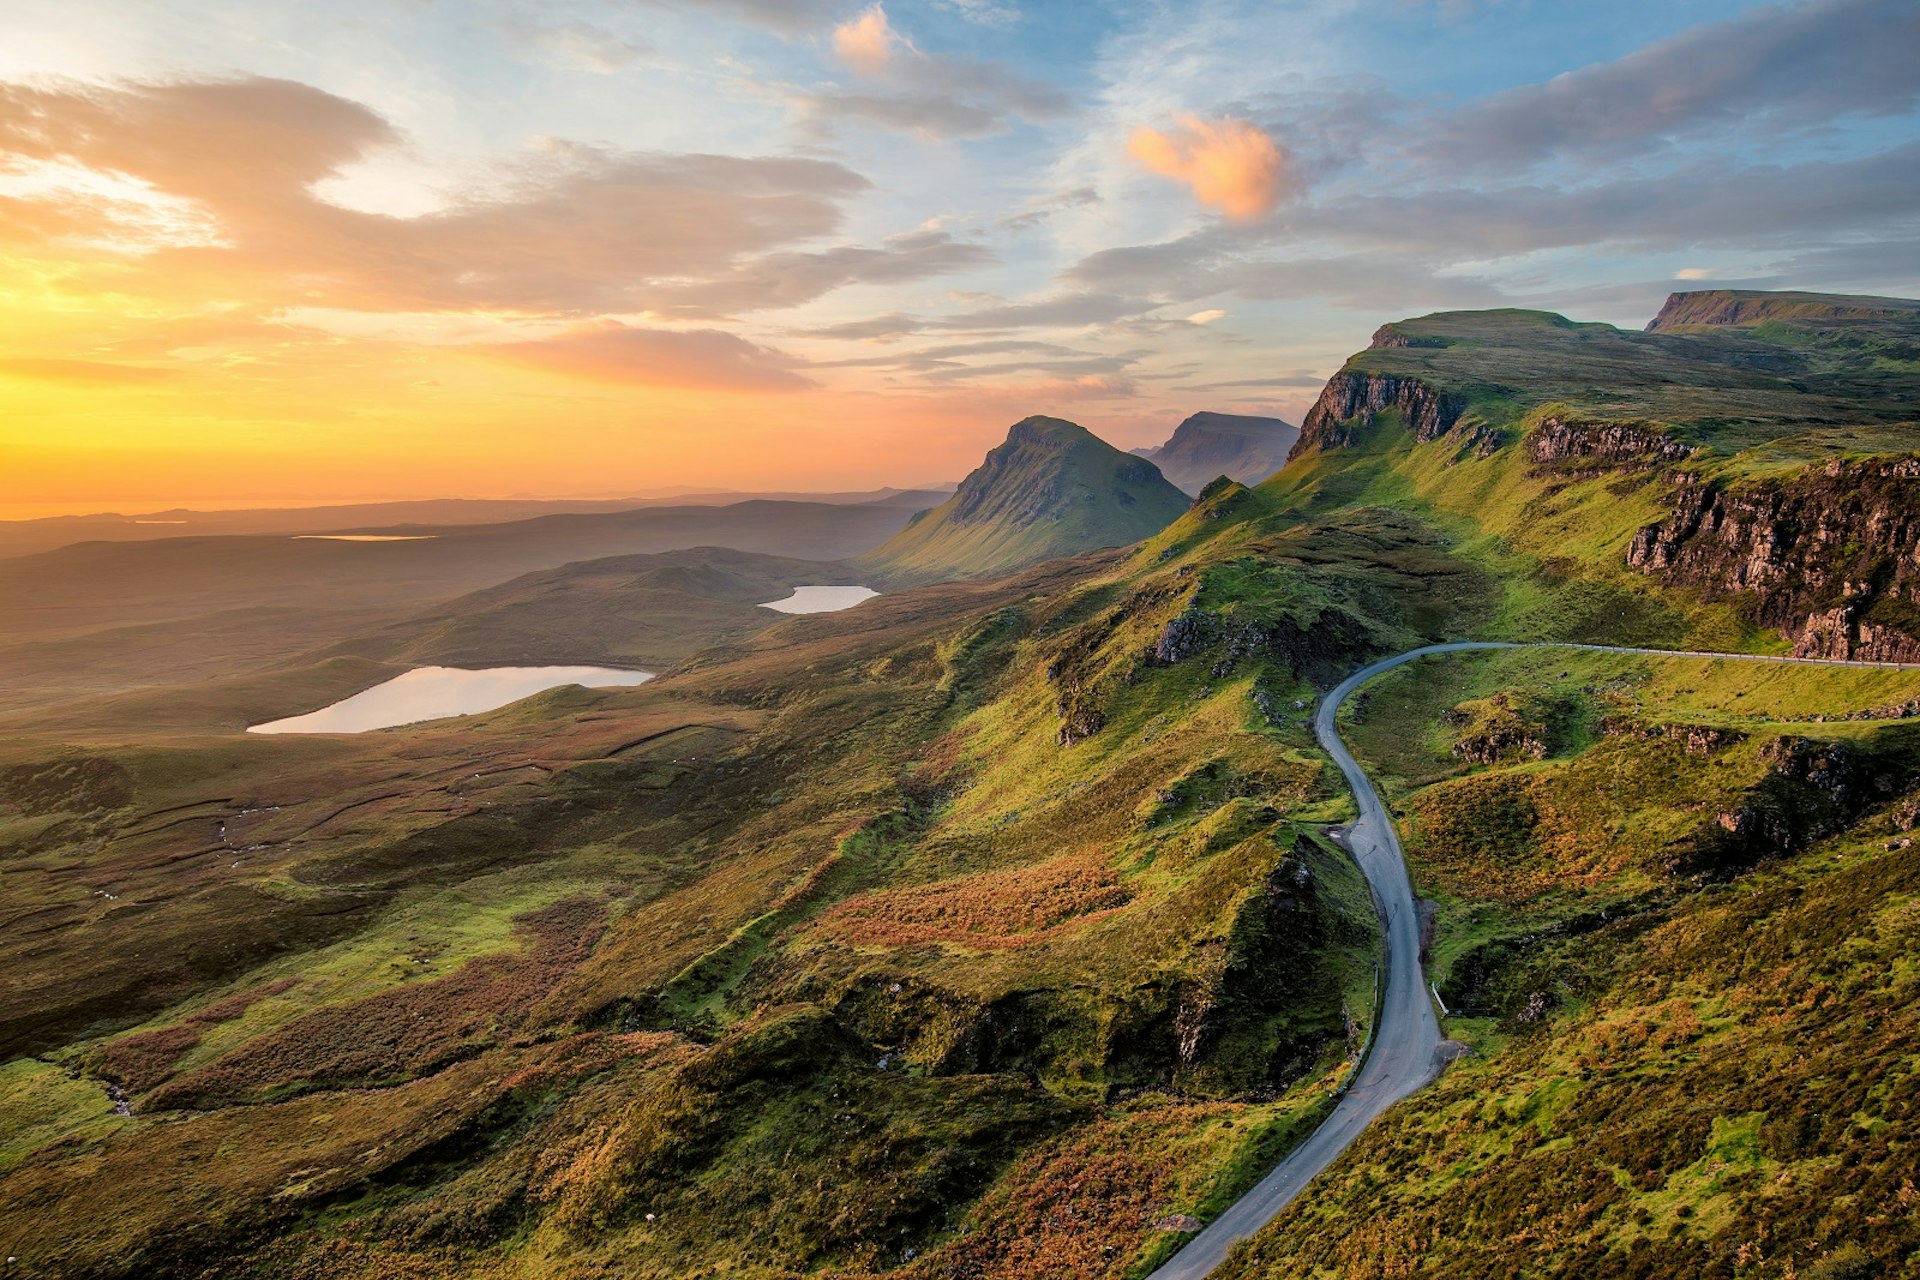 A scenic road on the Isle of Skye at sunset